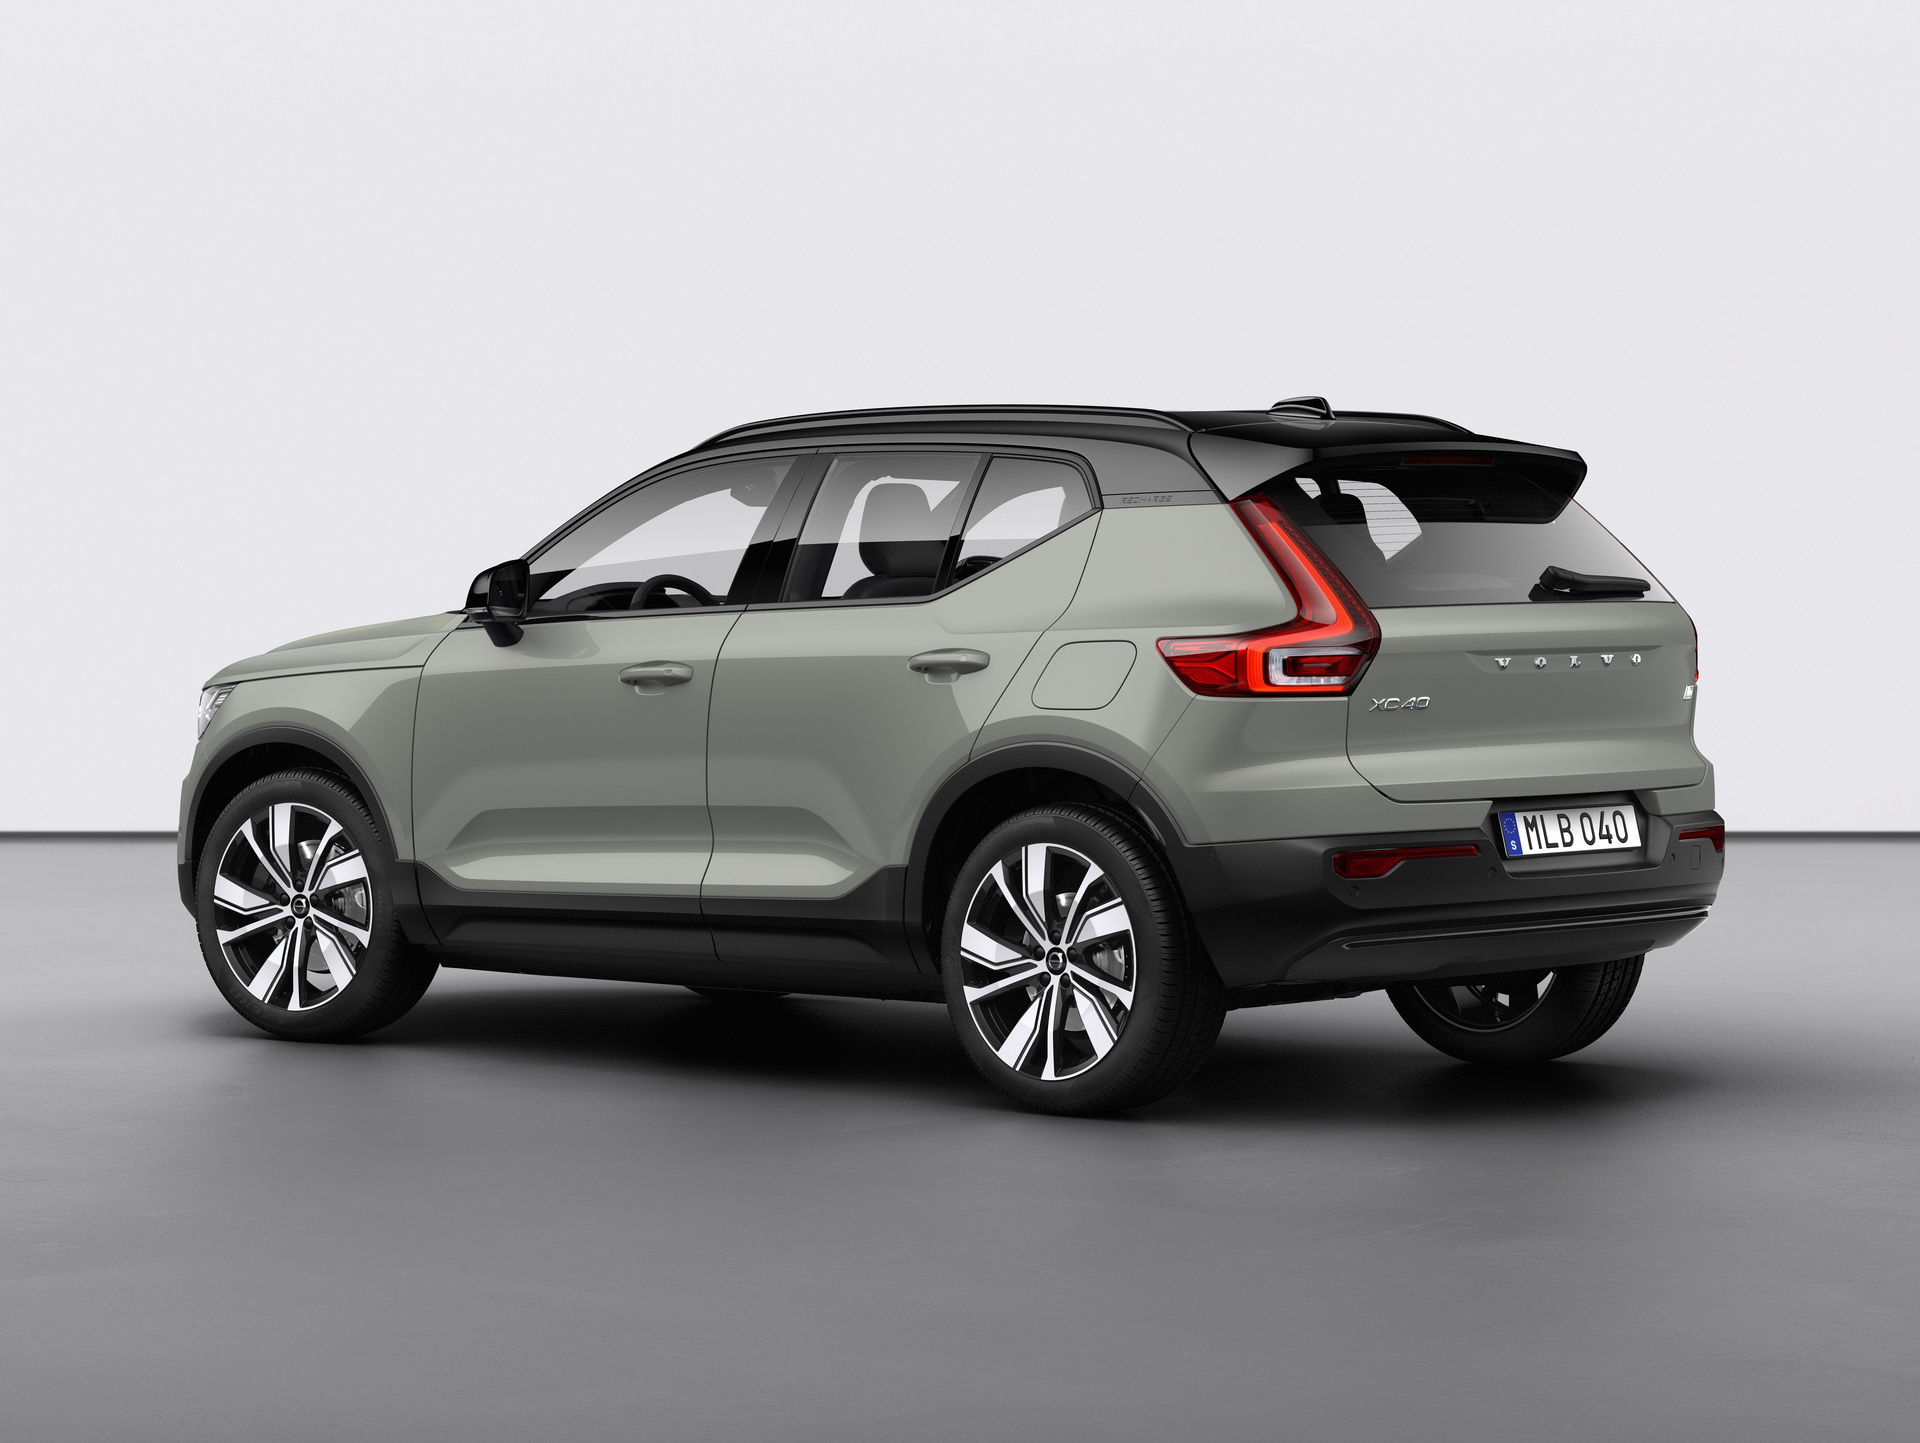 Volvo XC40 Recharge: Volvo's first fully electric auto expected in 2020